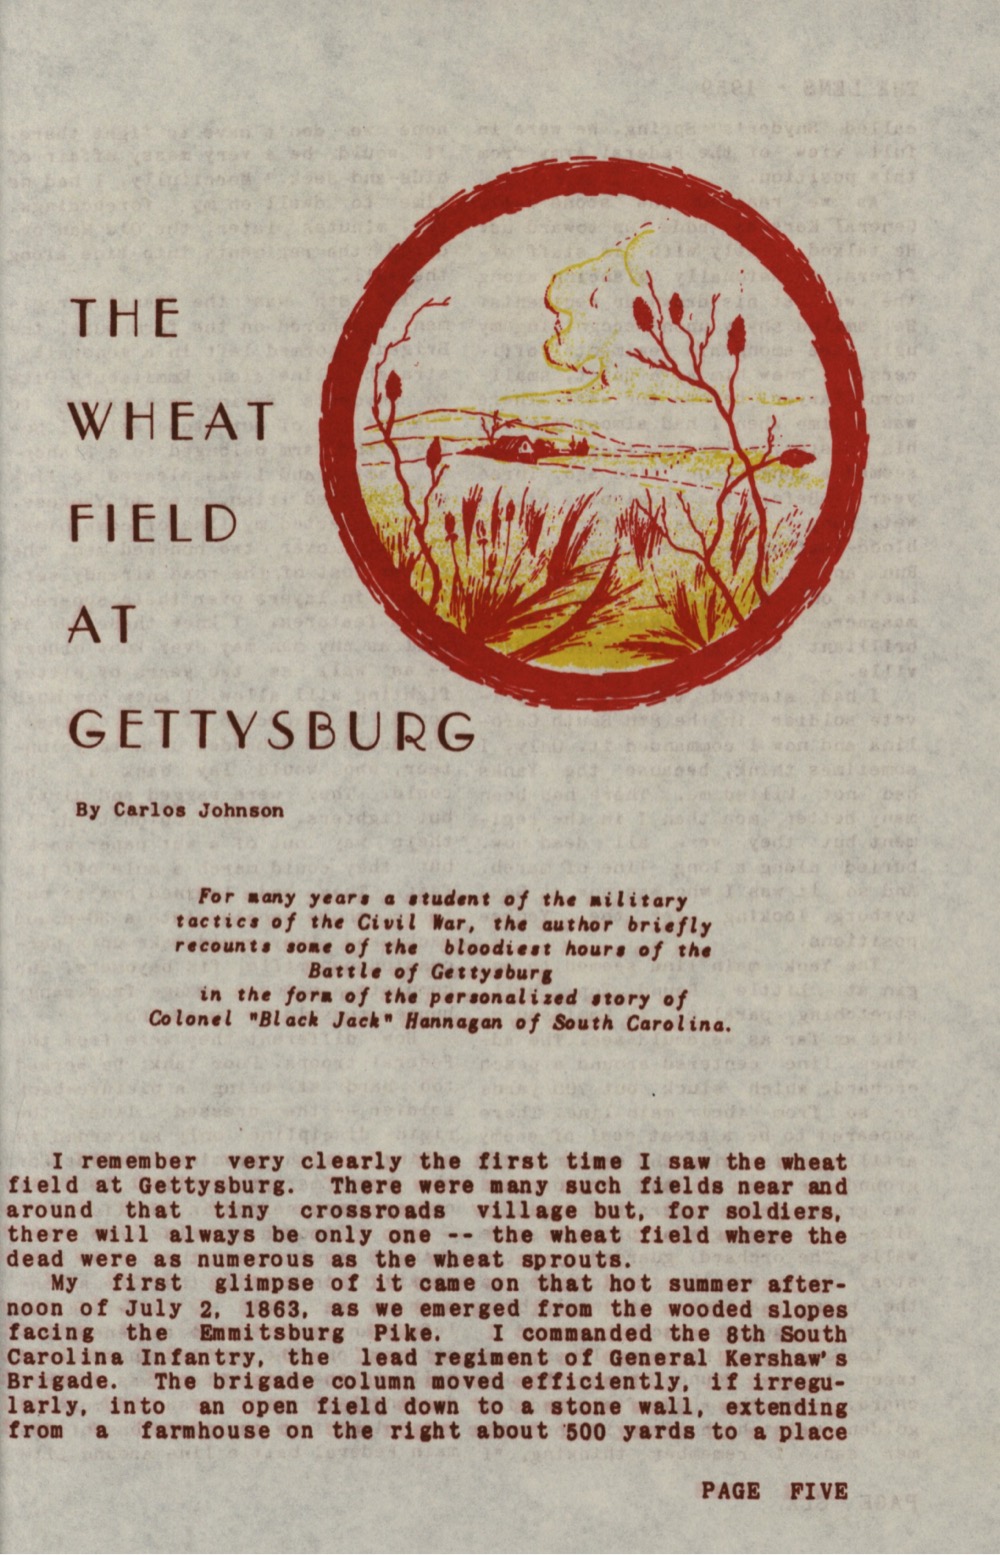 an article called The Wheat Field at Gettysburg published in a prison newspaper